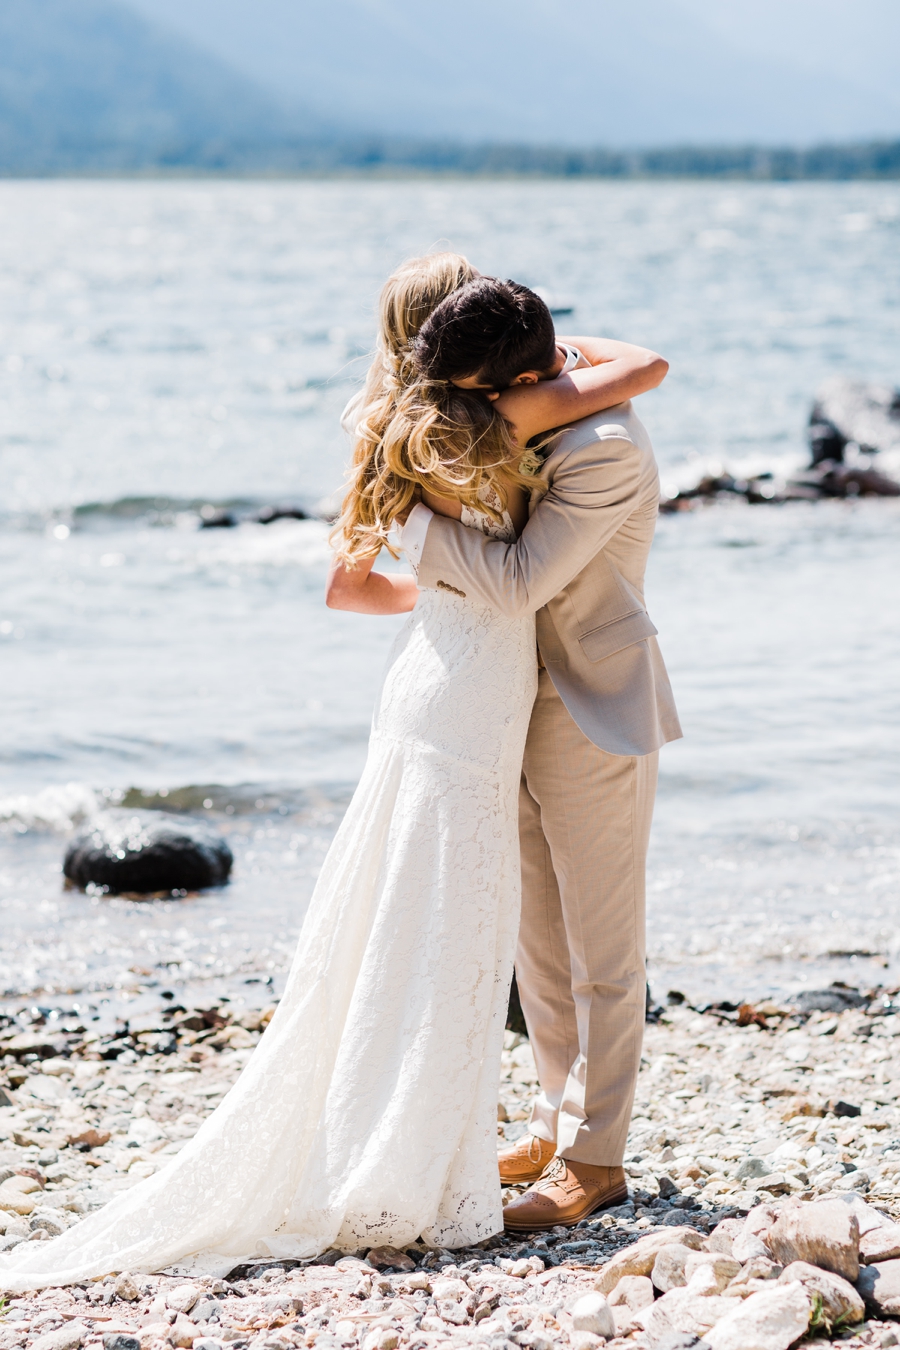 A bride and groom embrace near a mountain lake in Leavenowrth